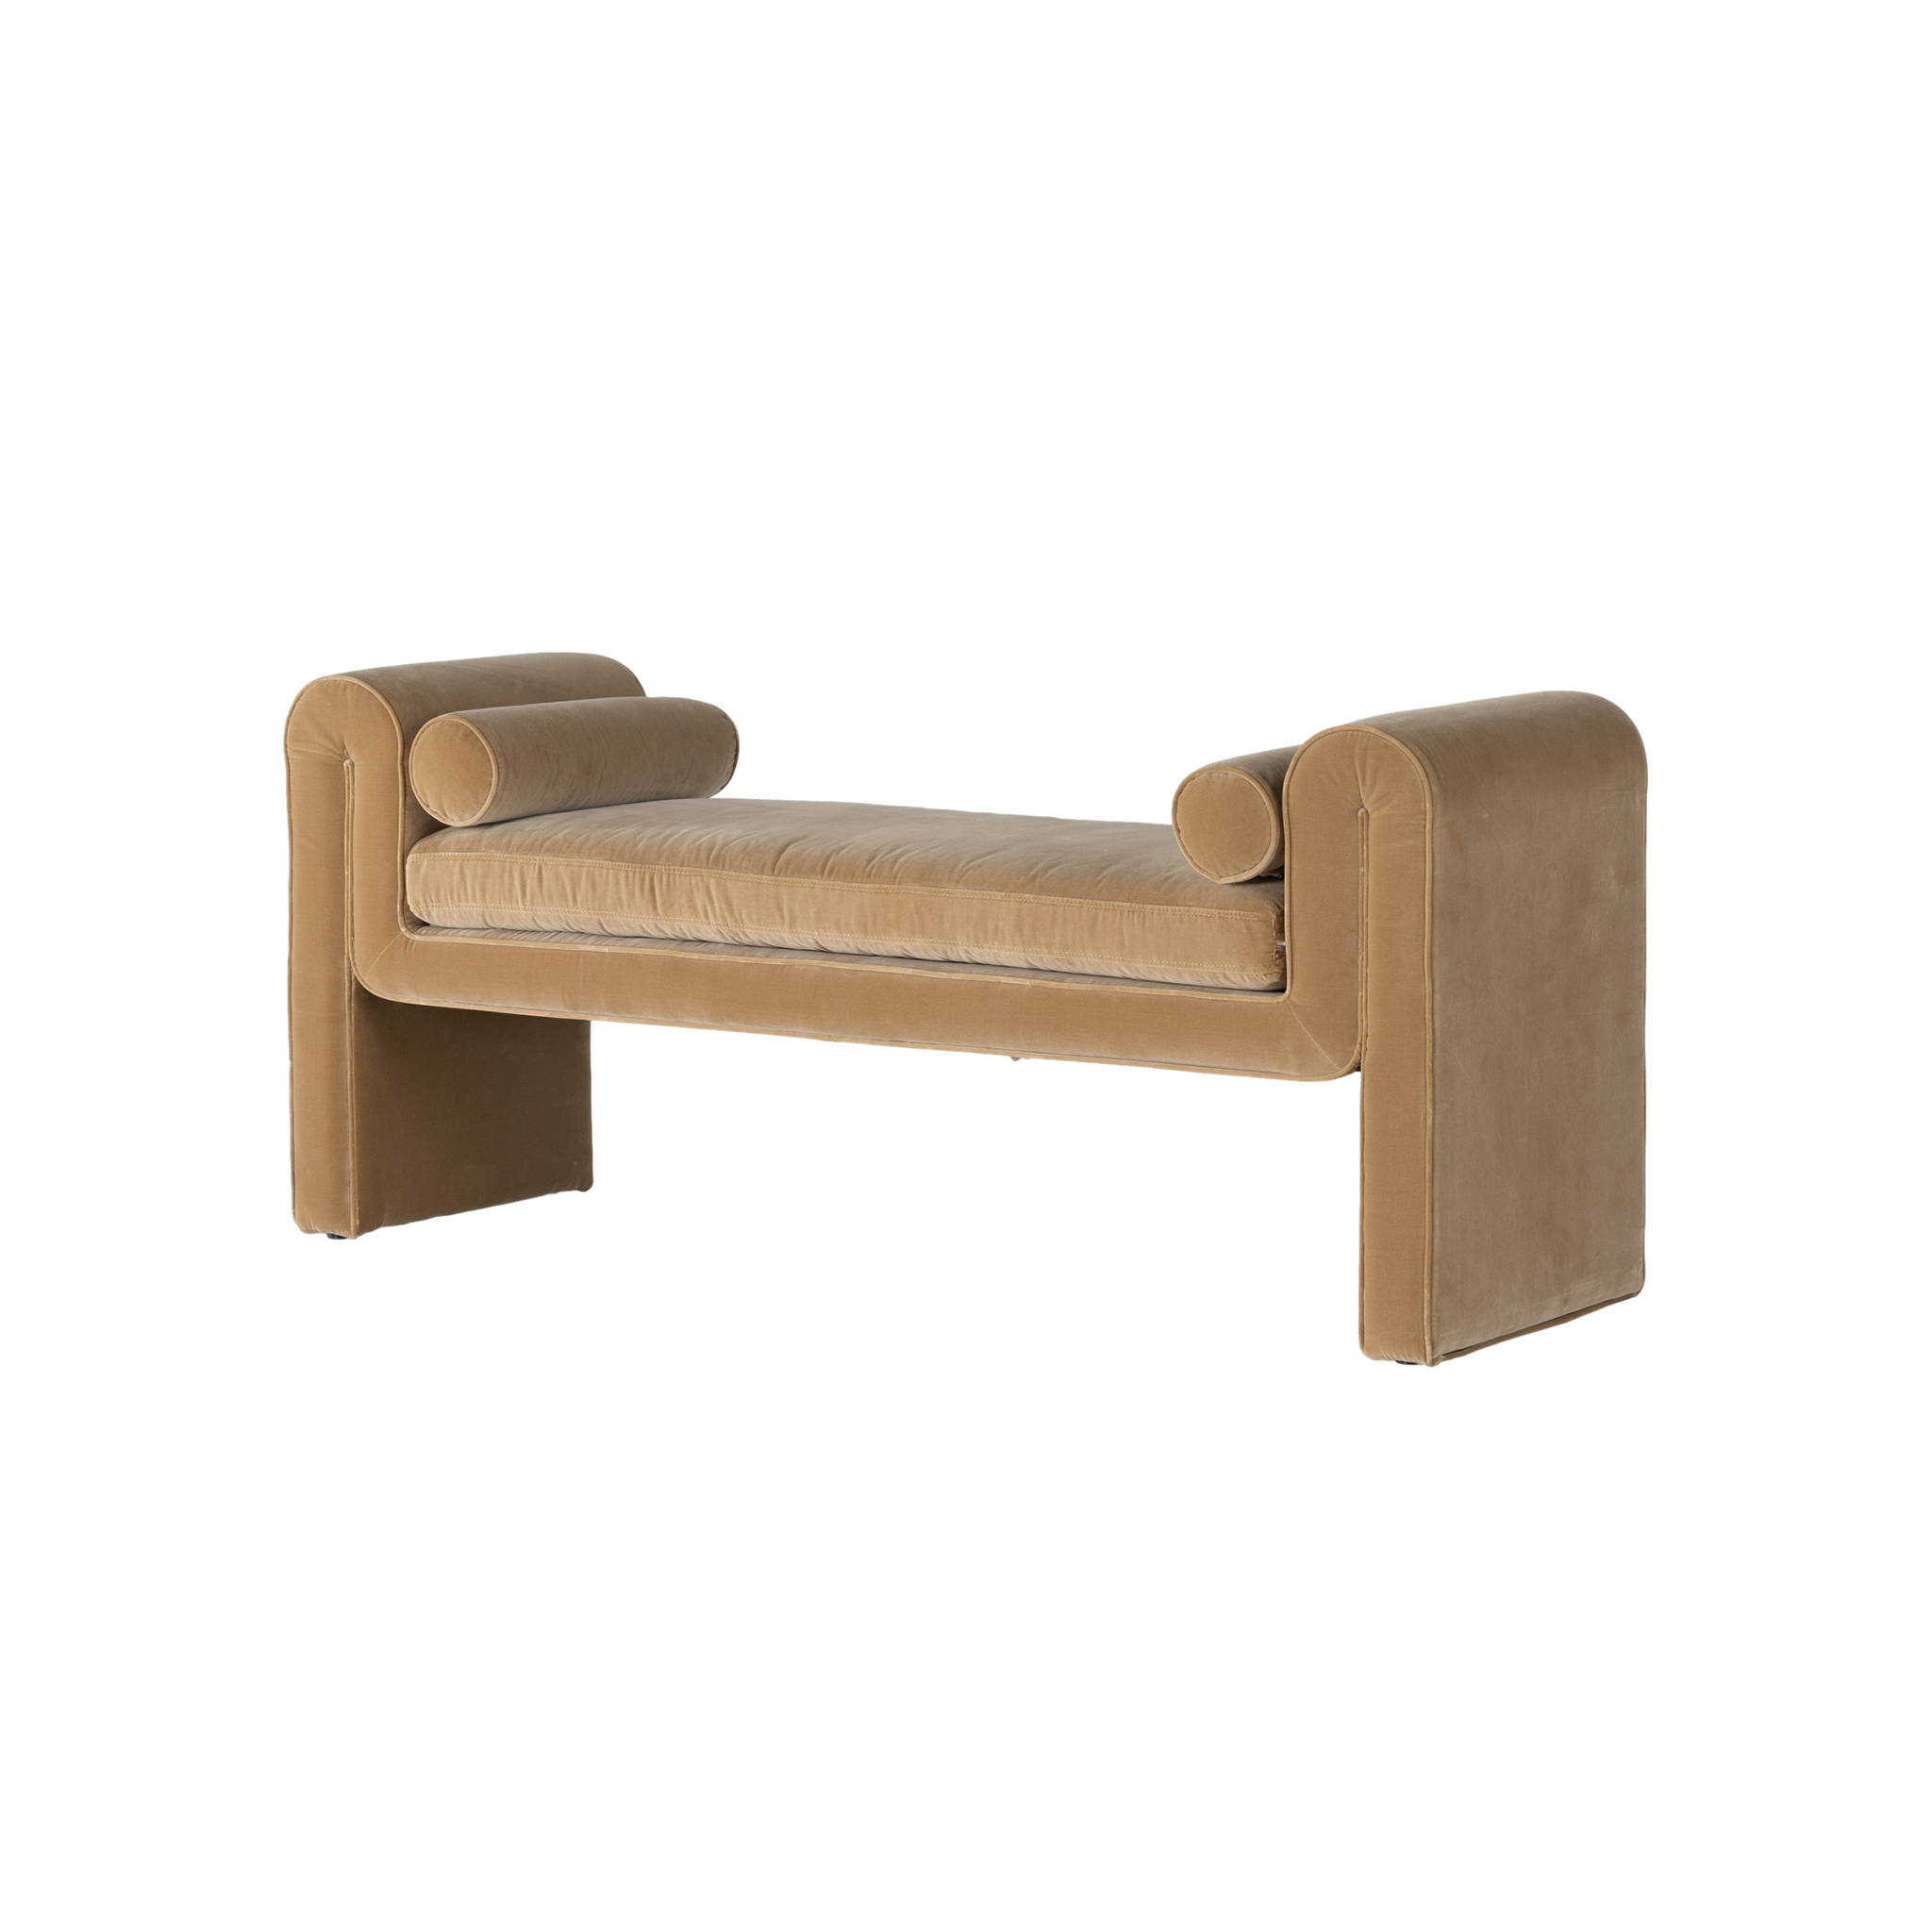 Mitchell Accent Bench in Camel